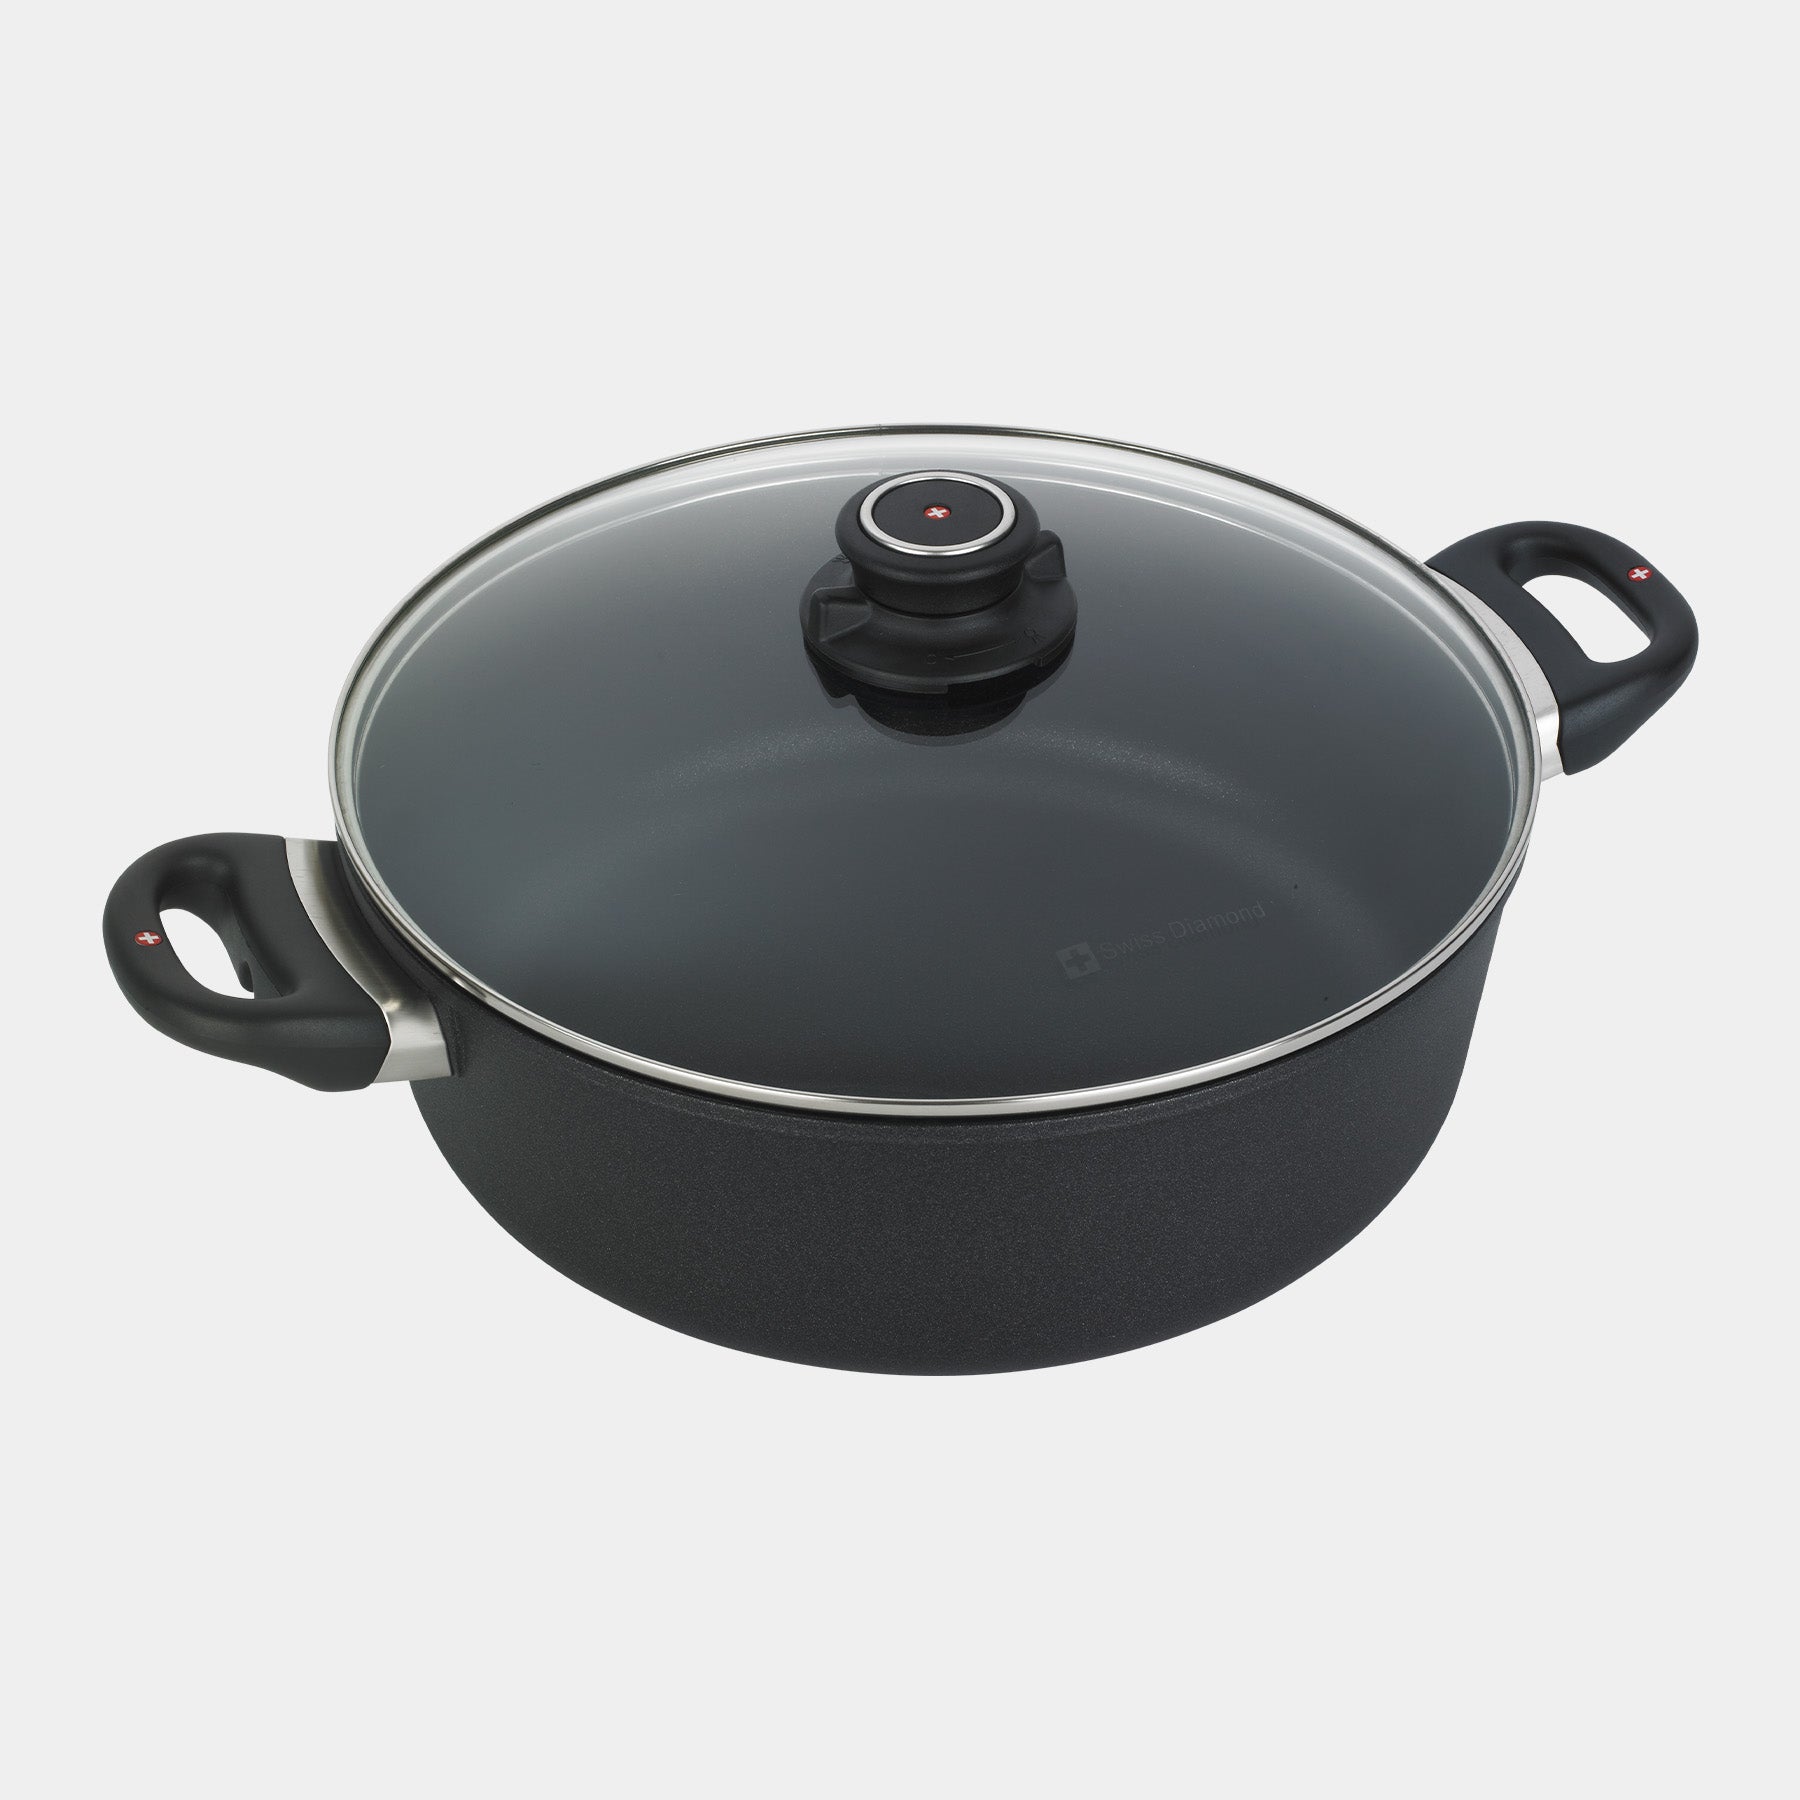 XD Nonstick 5.3 qt Braiser with Glass Lid - Induction